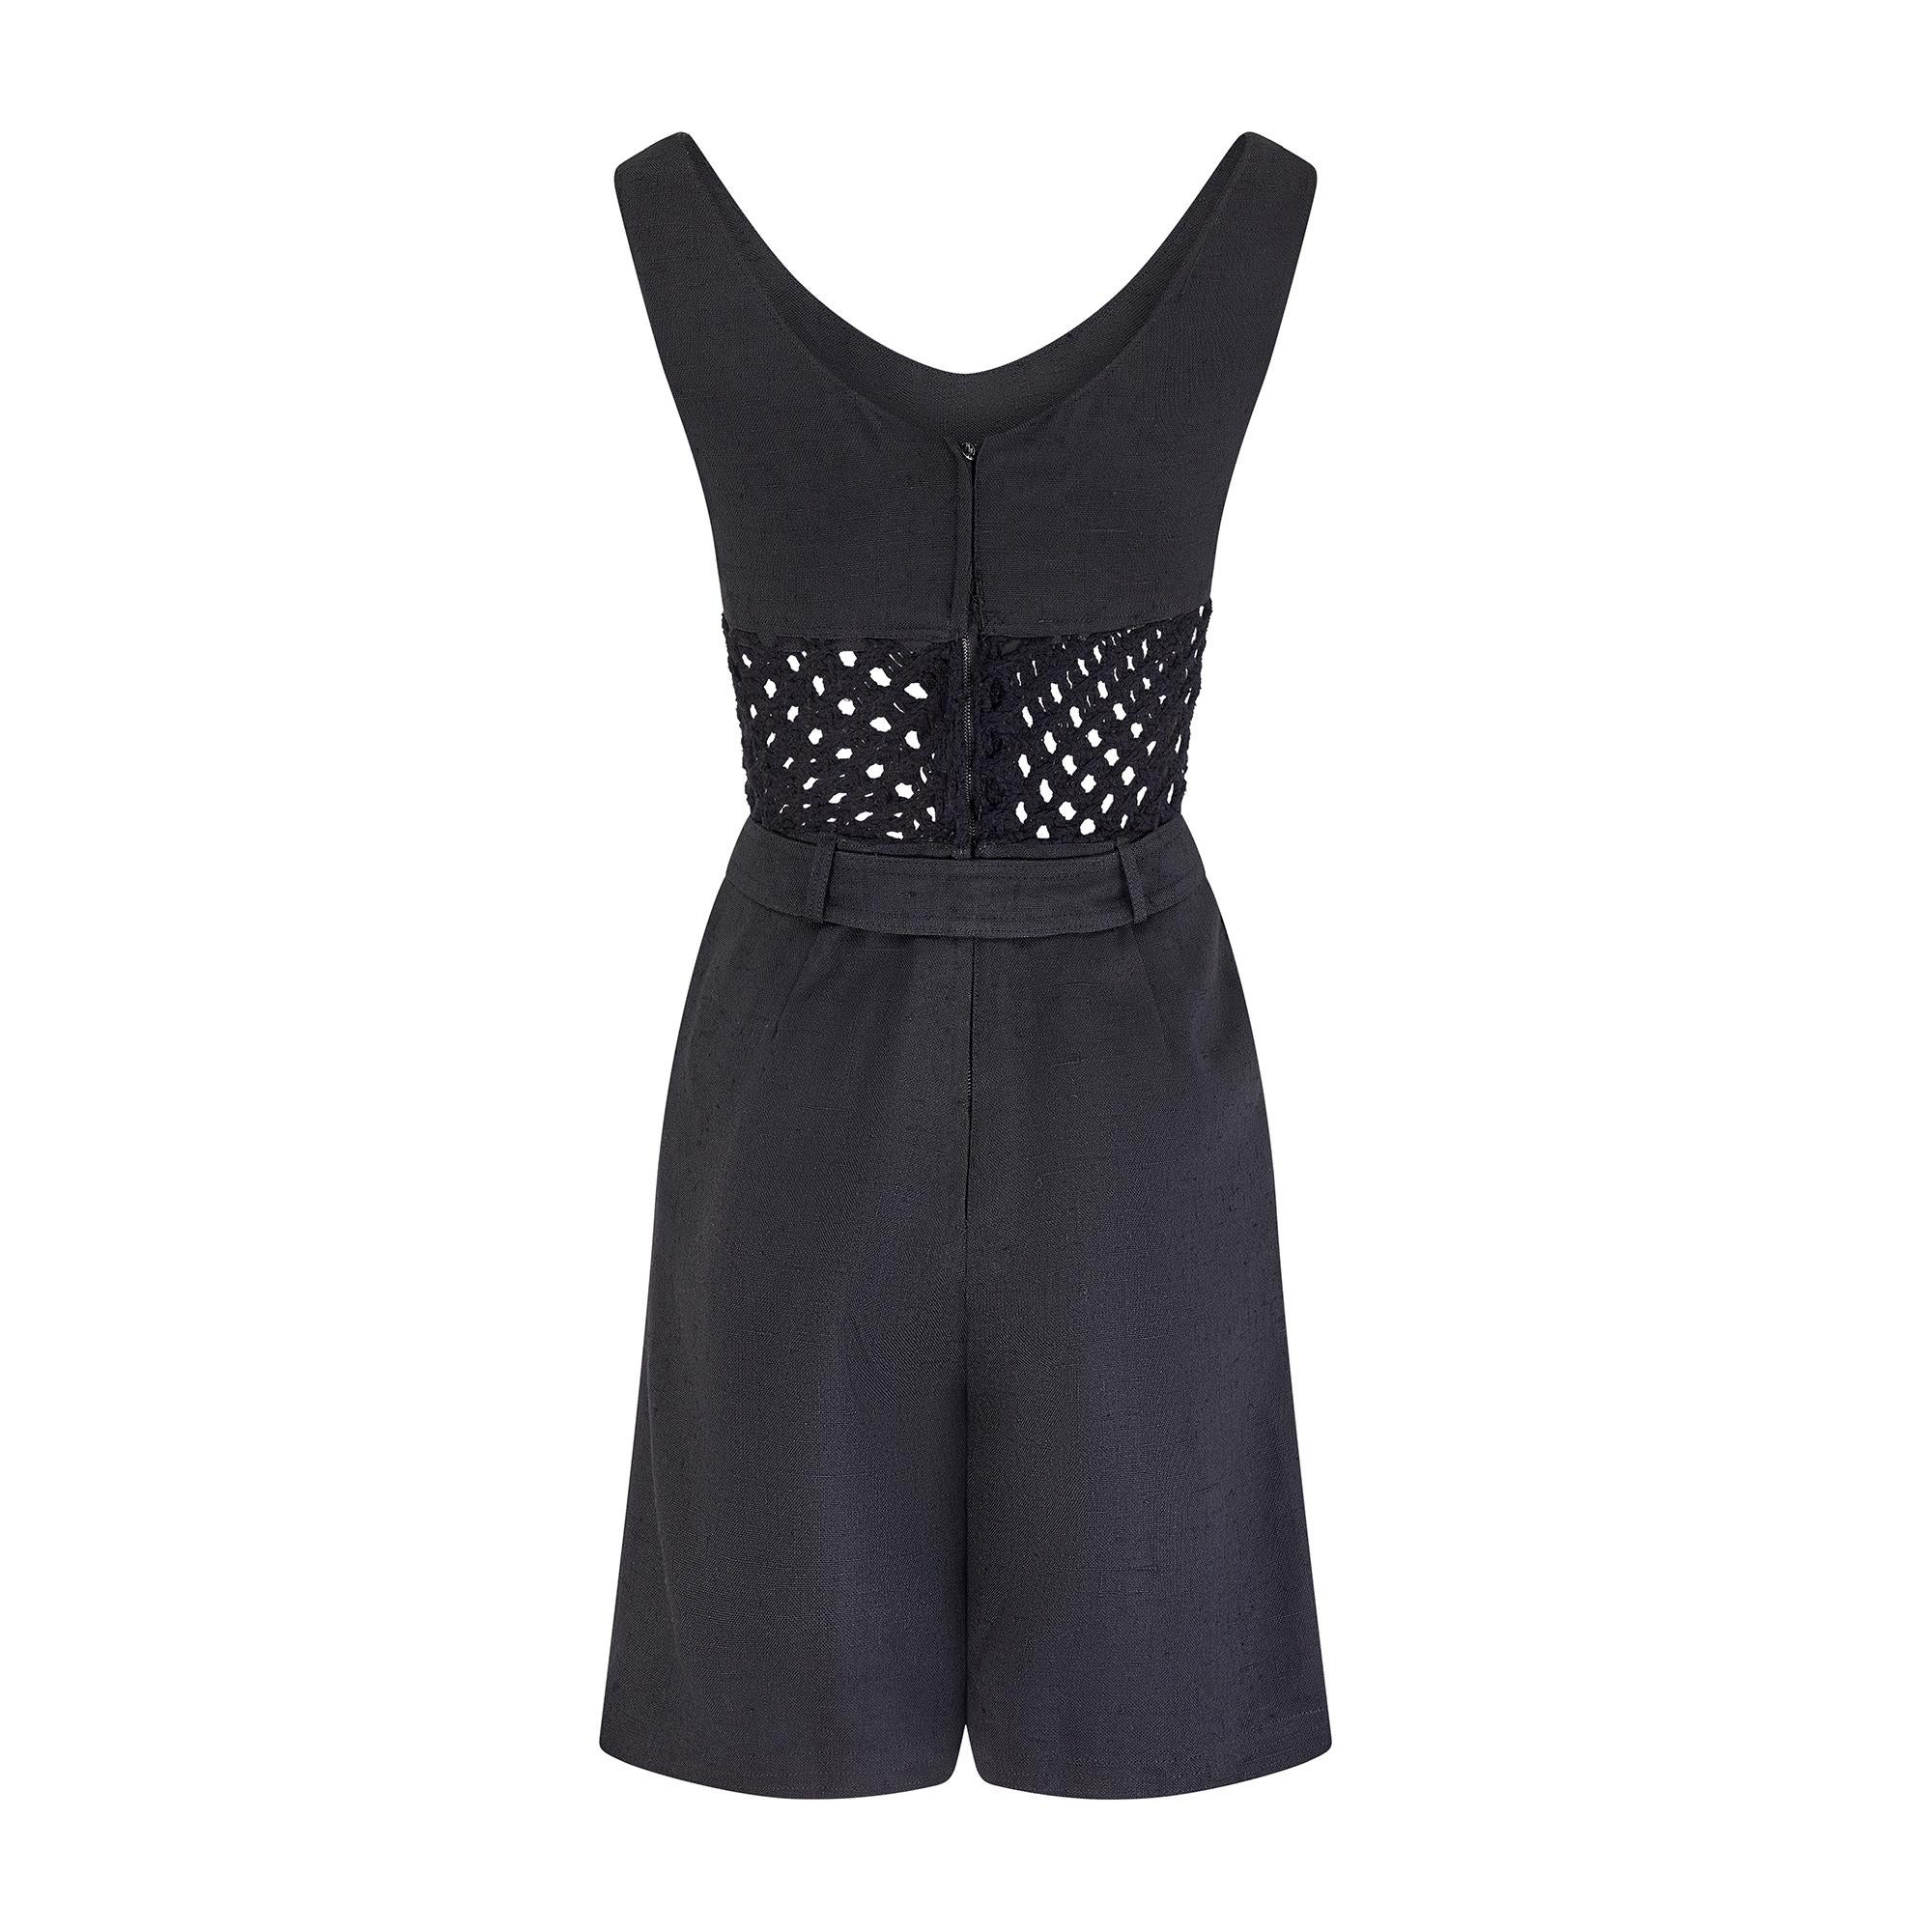 1965 Mary Quant Documented Black Playsuit with Crochet Bodice In Excellent Condition For Sale In London, GB